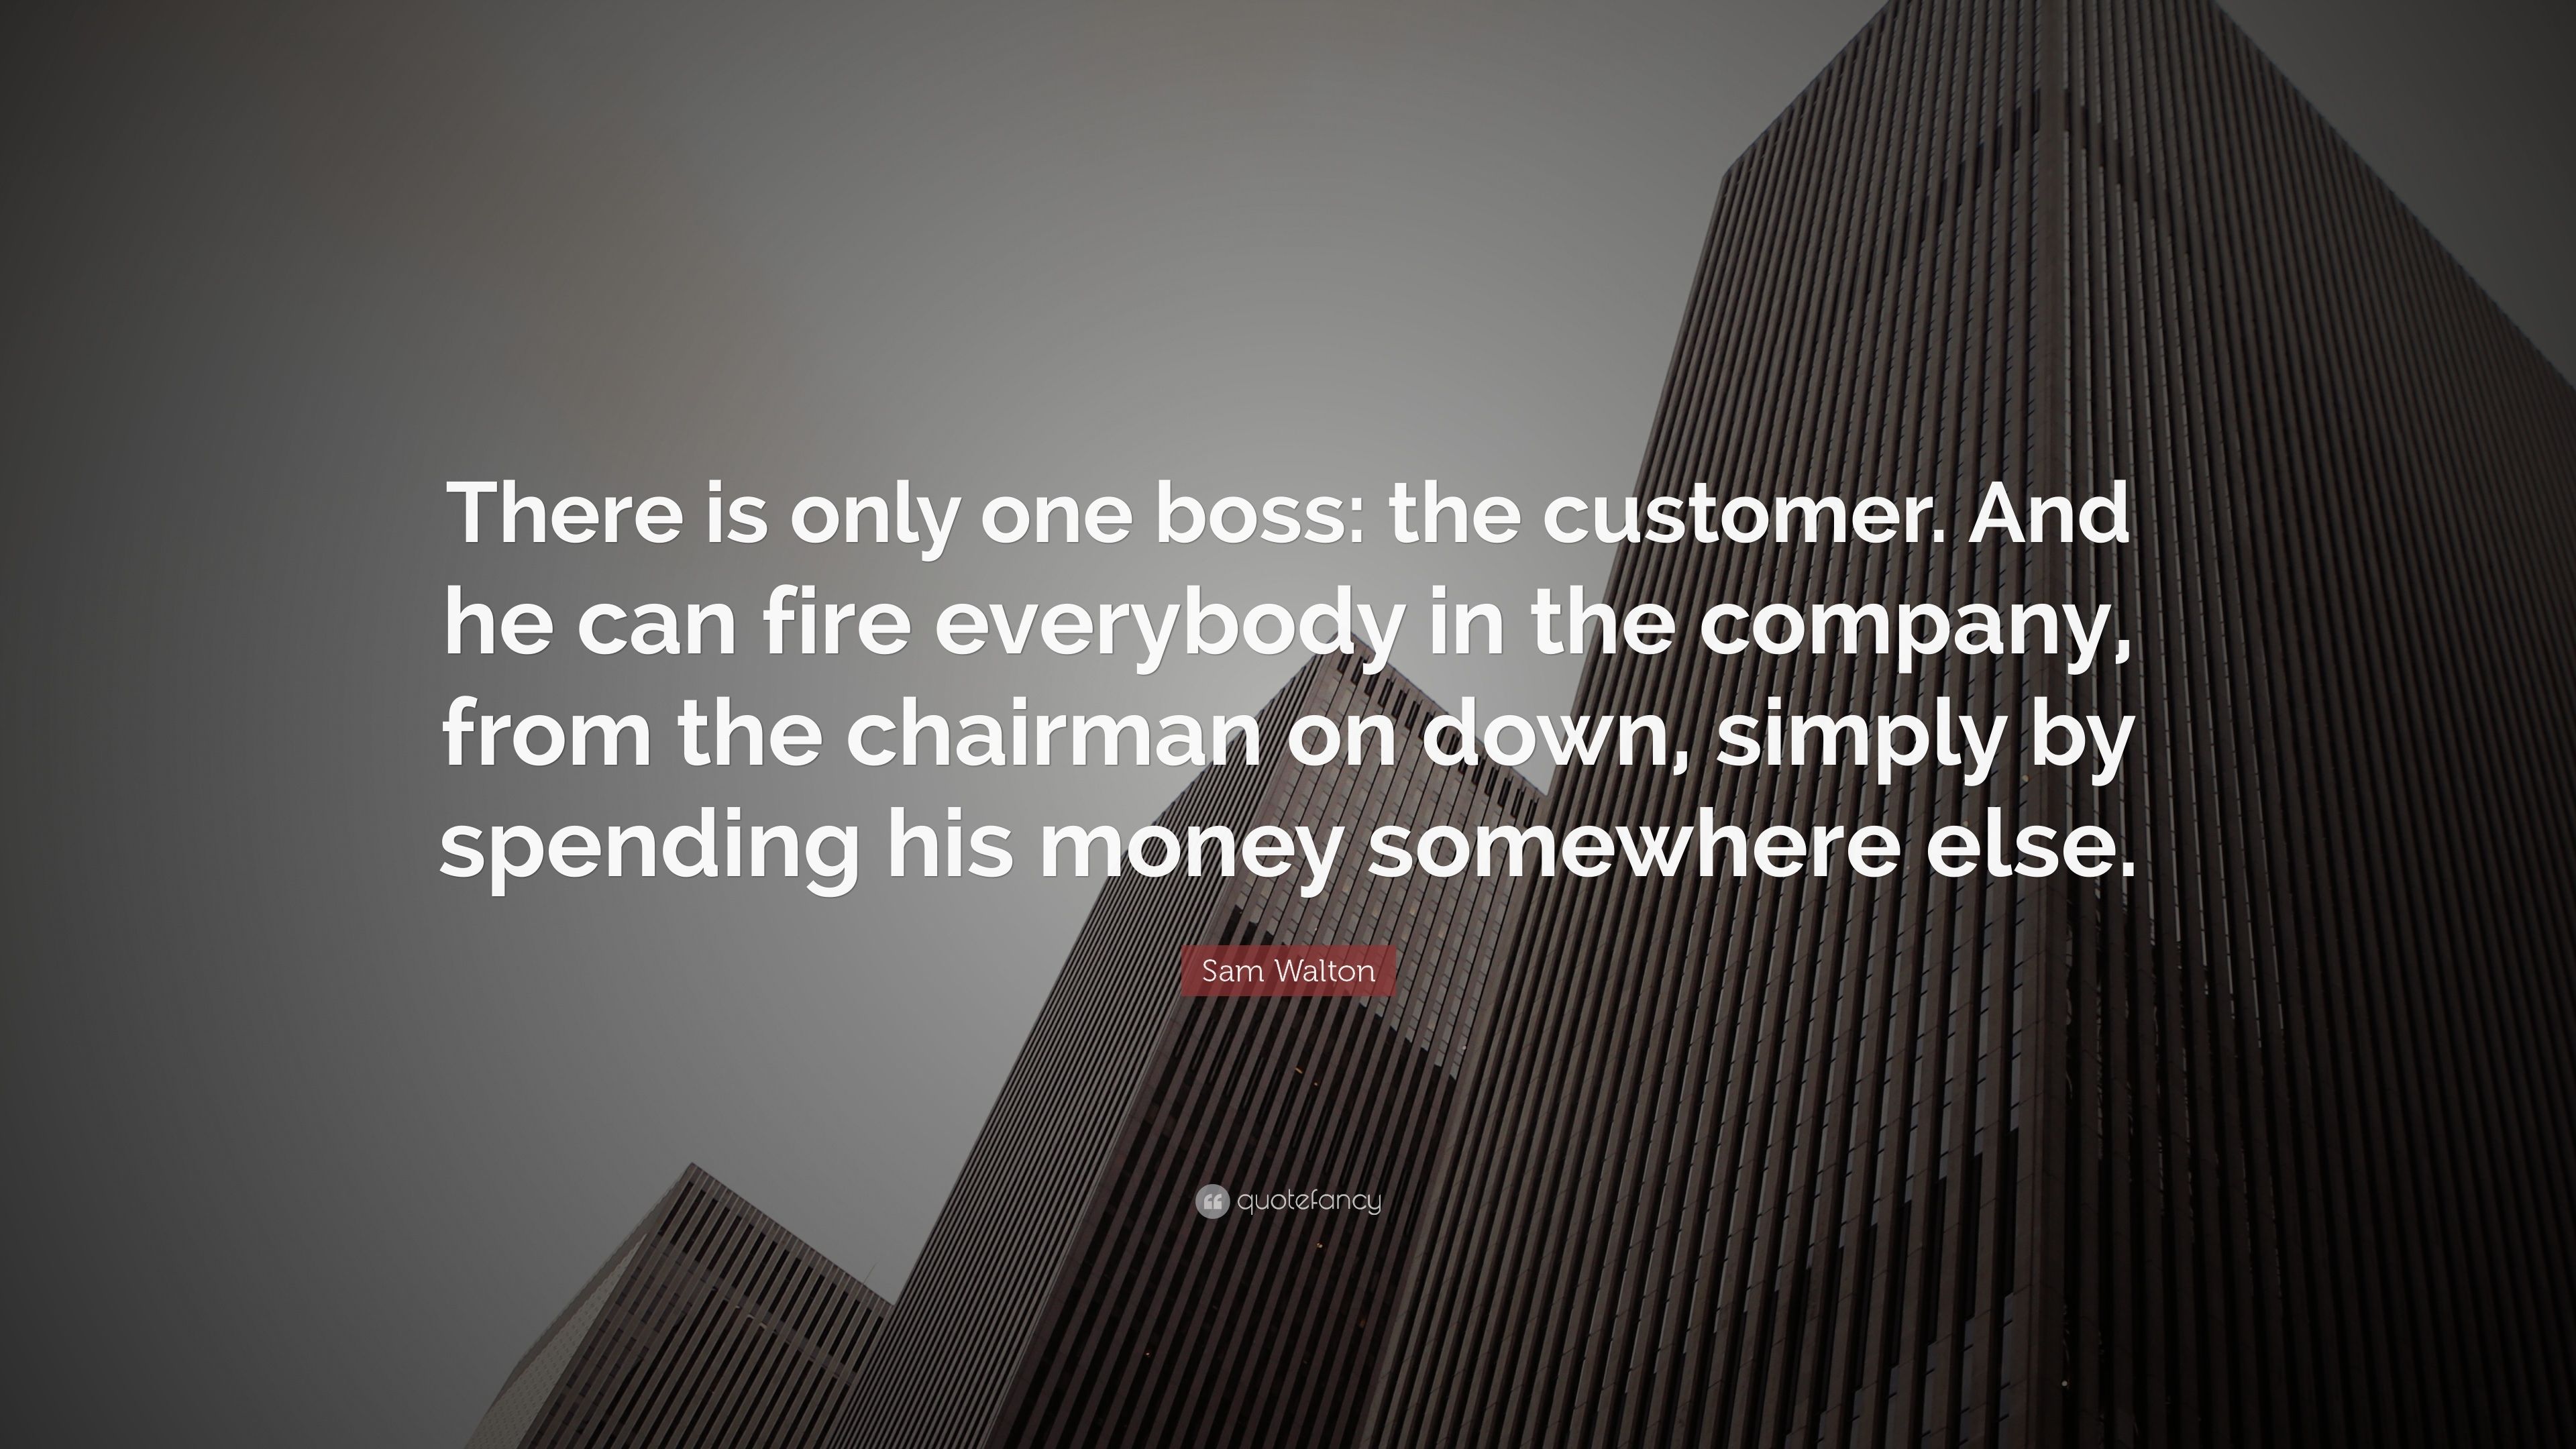 Sam Walton Quote: “There is only one boss: the customer. And he